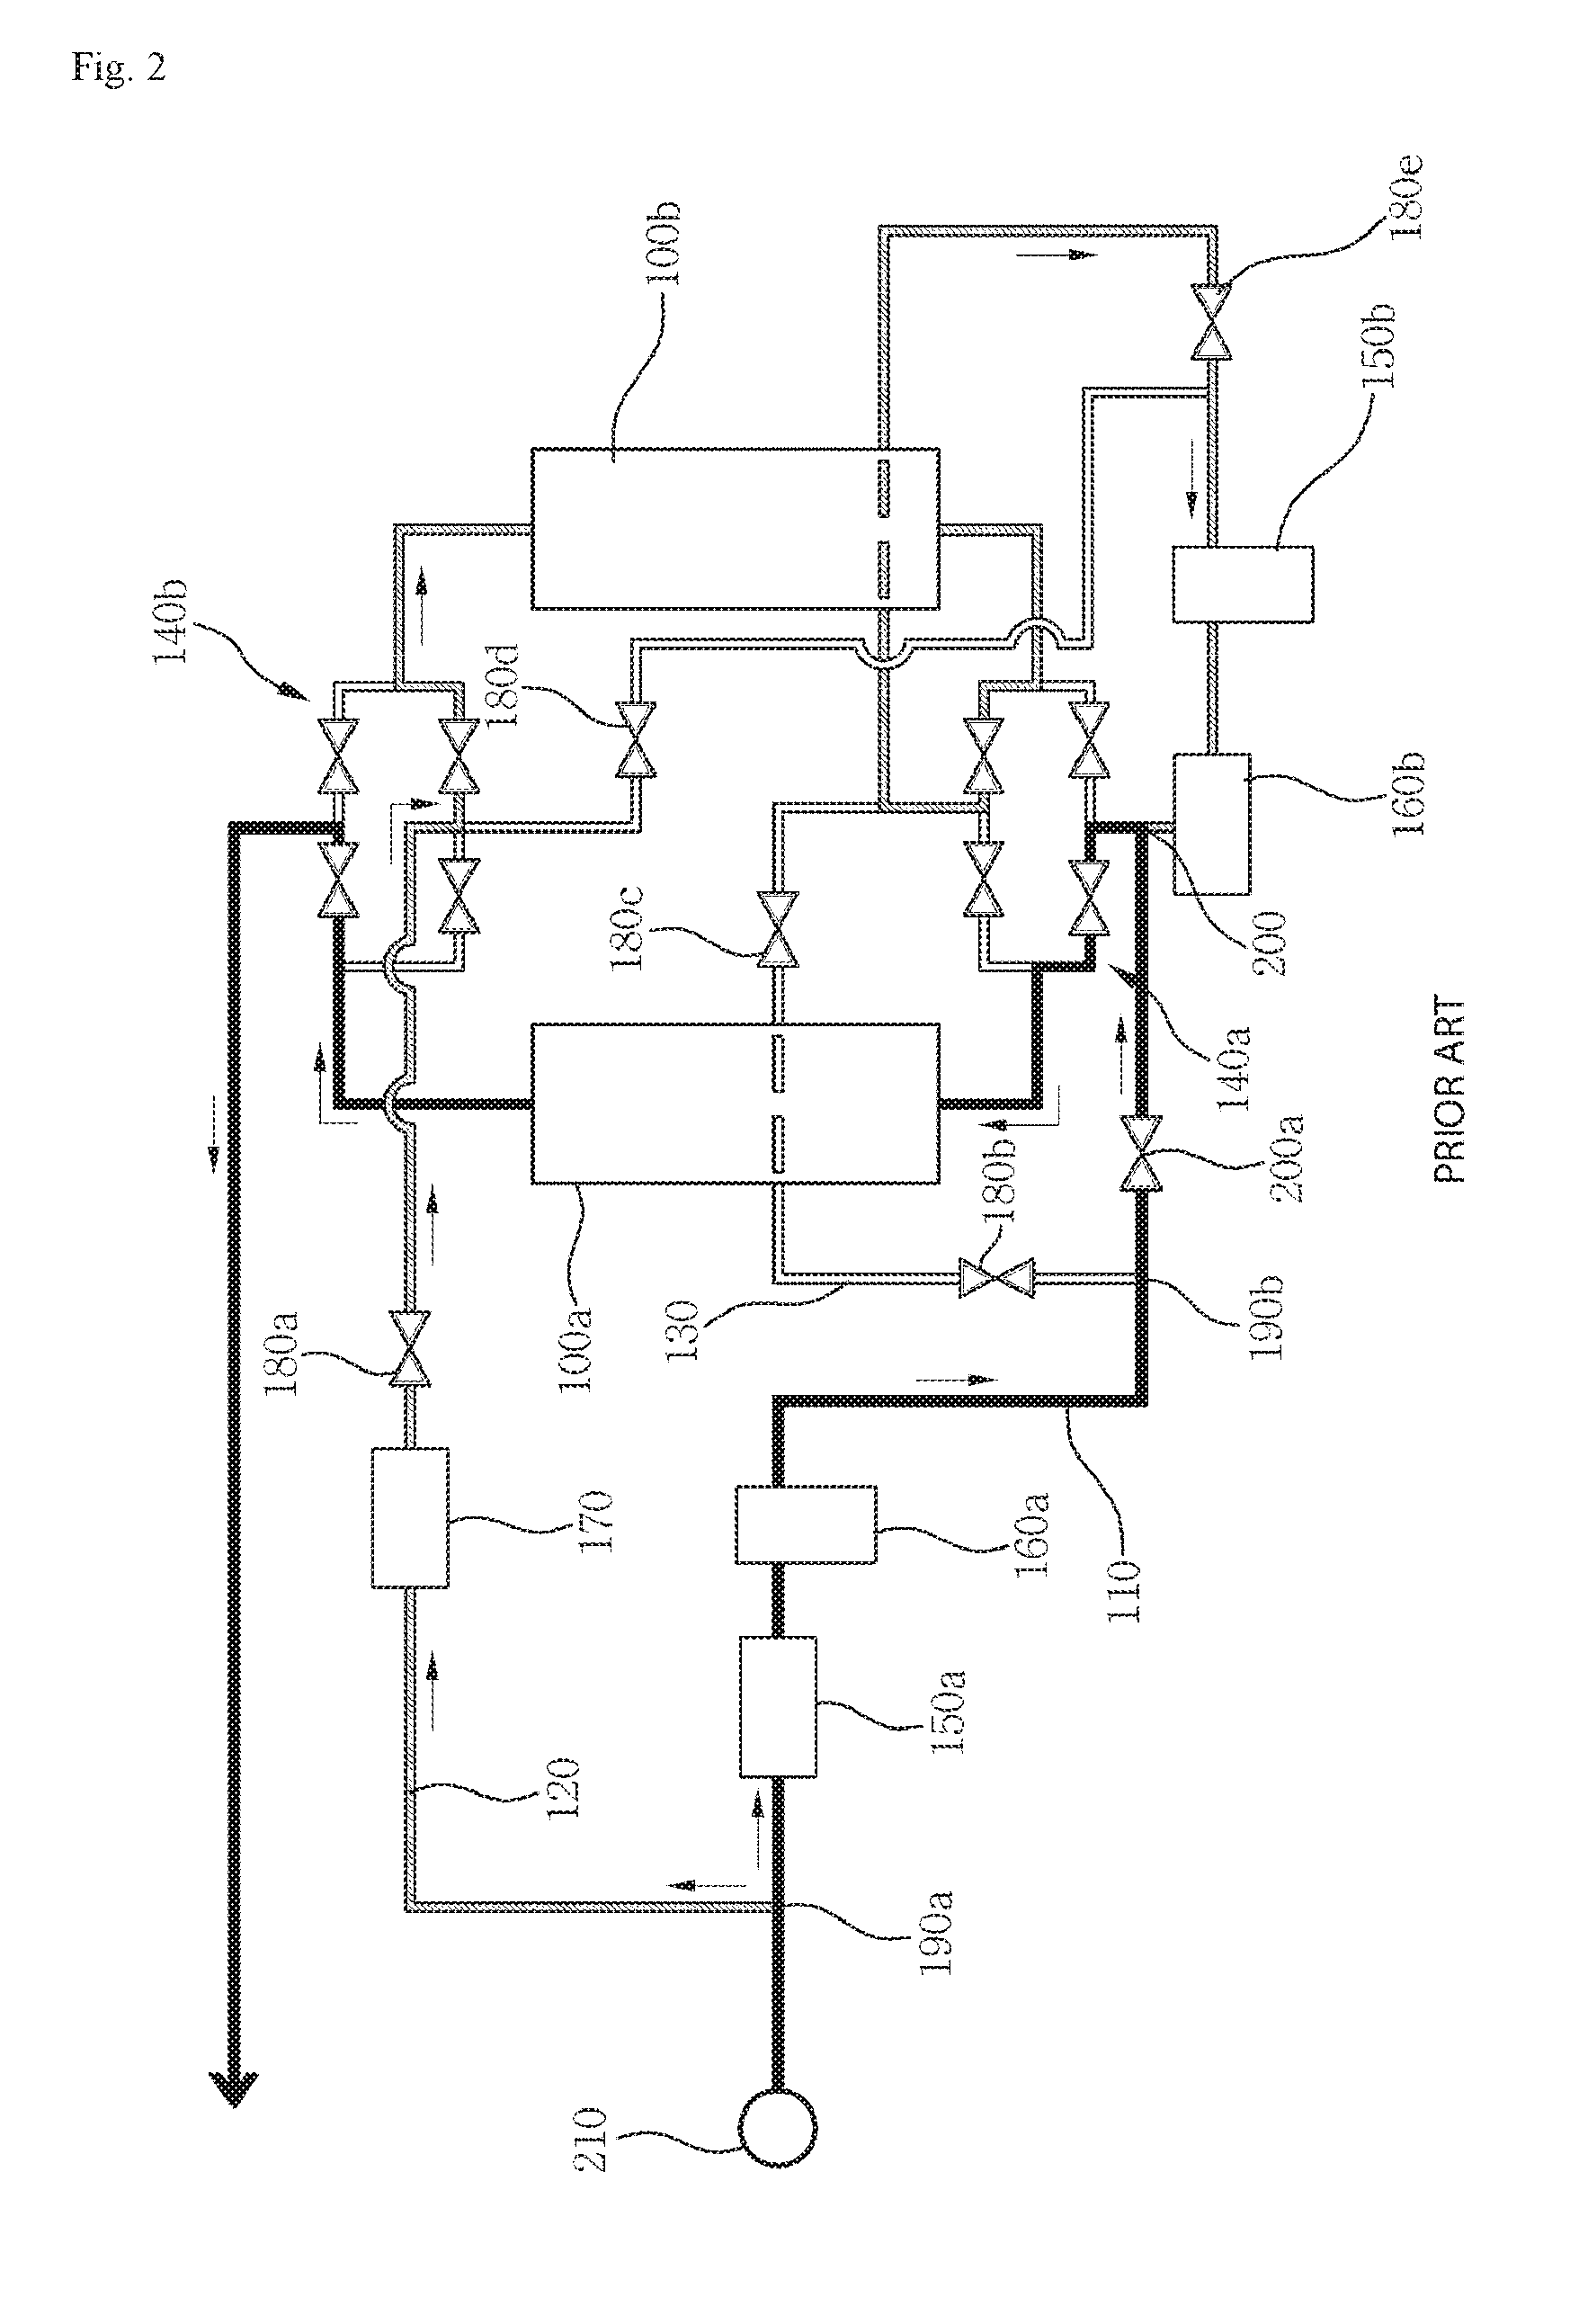 Adsorption-type air drying system with blower non-purge operation using compressed heat